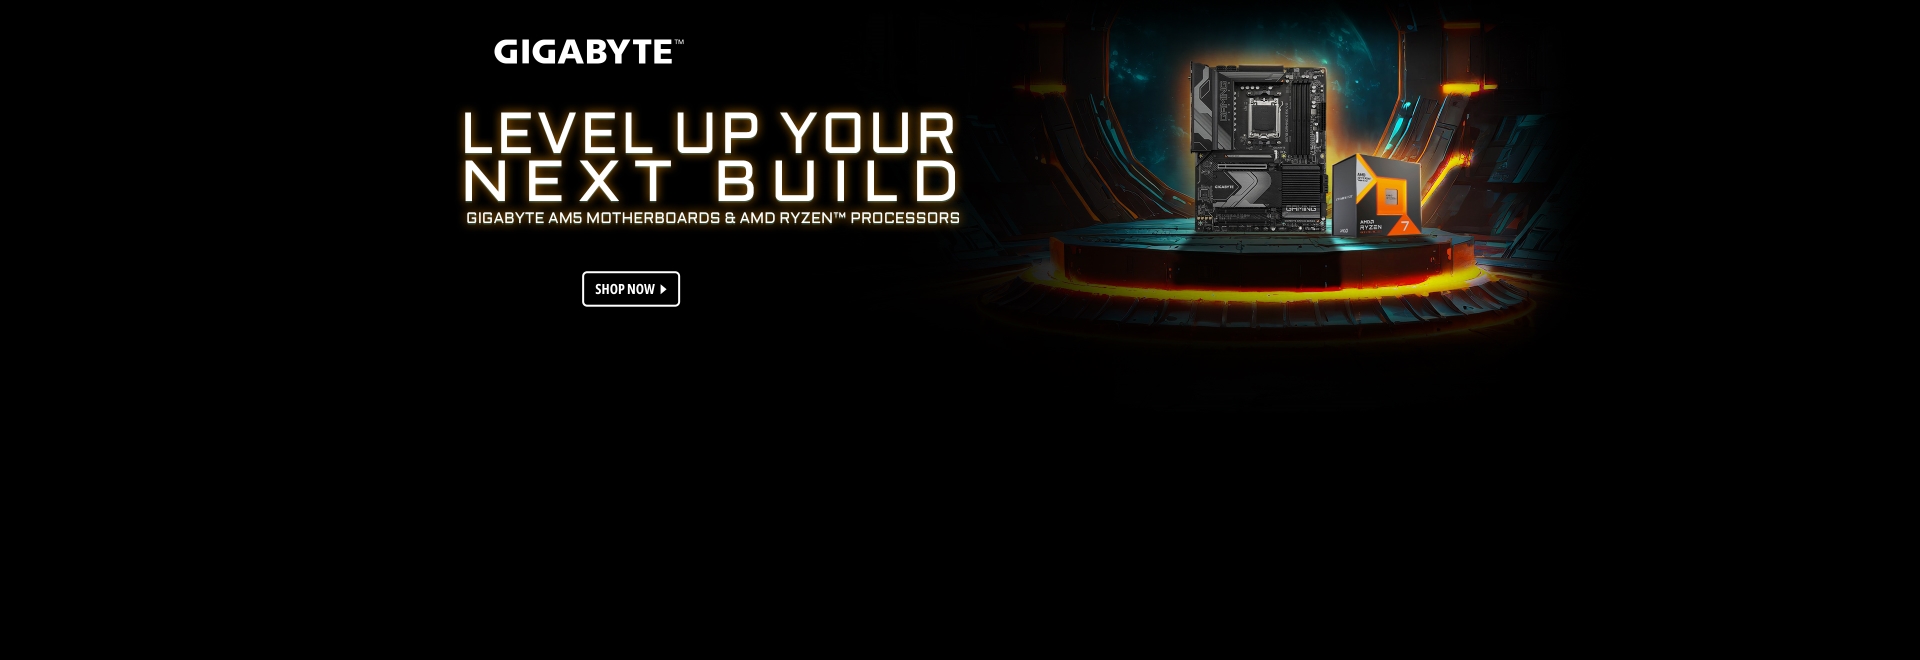  Level up your next build